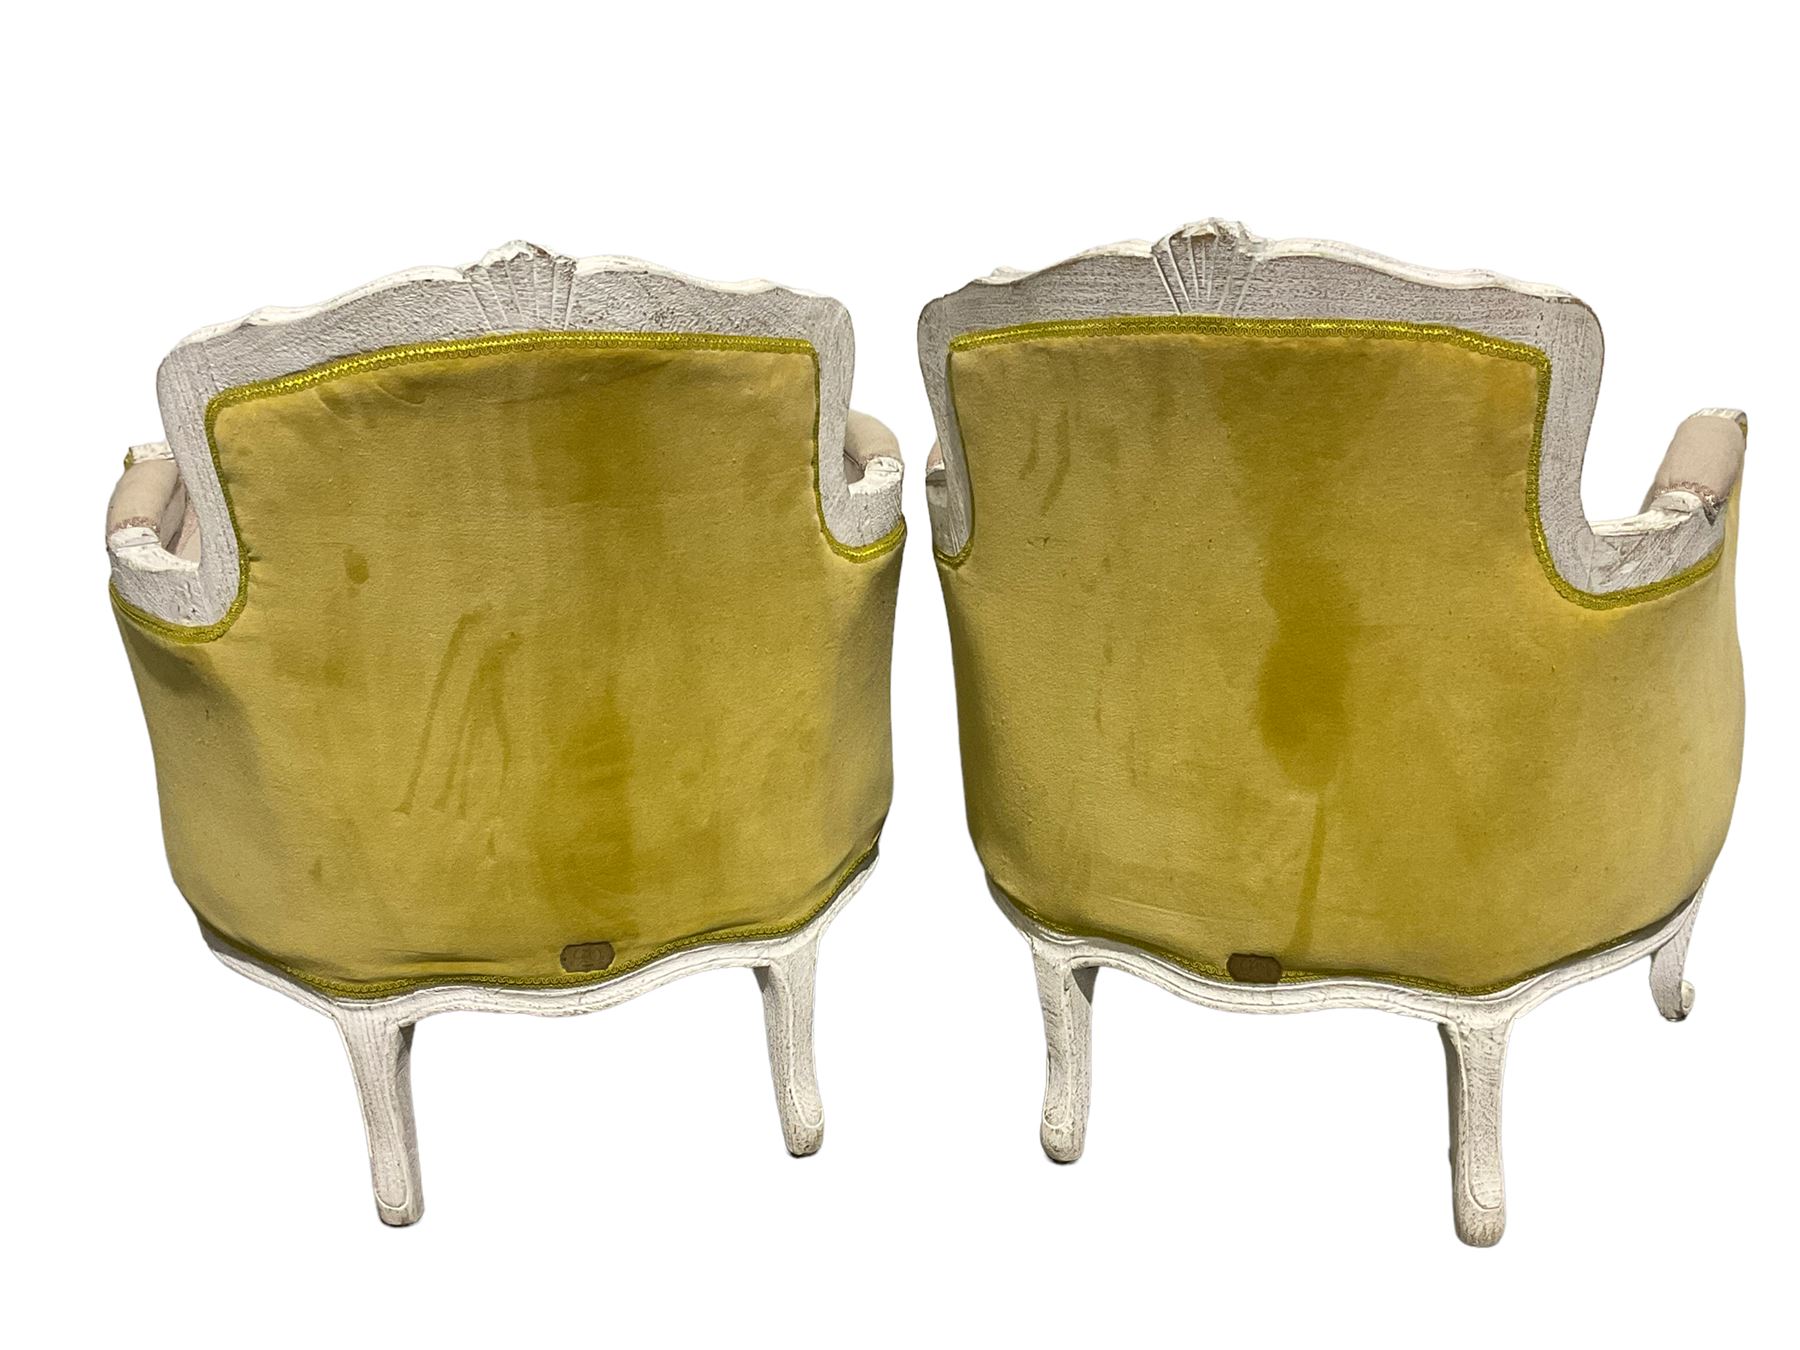 G&G - Pair of French style tub chairs - Image 4 of 6